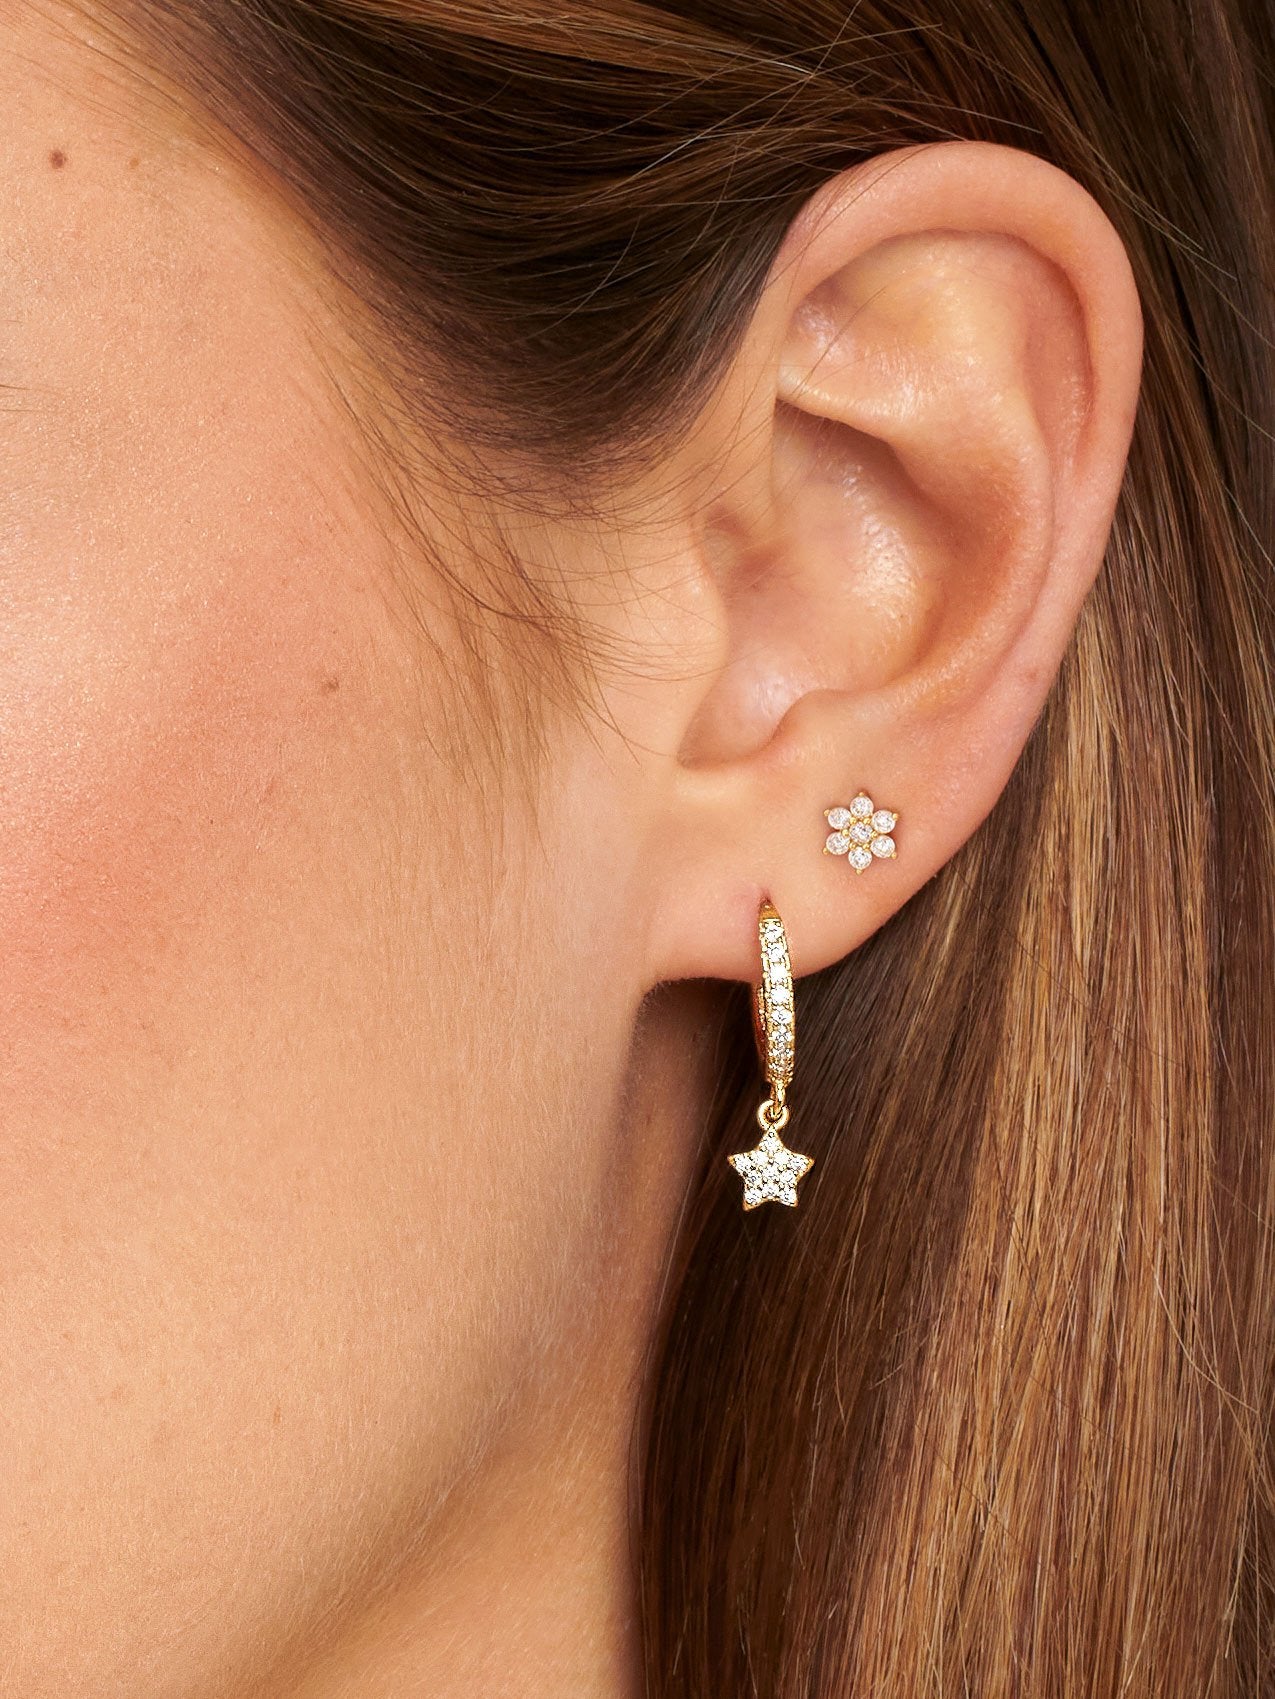 Tiny gold flower stud earrings paired with dangling star charm hoops.